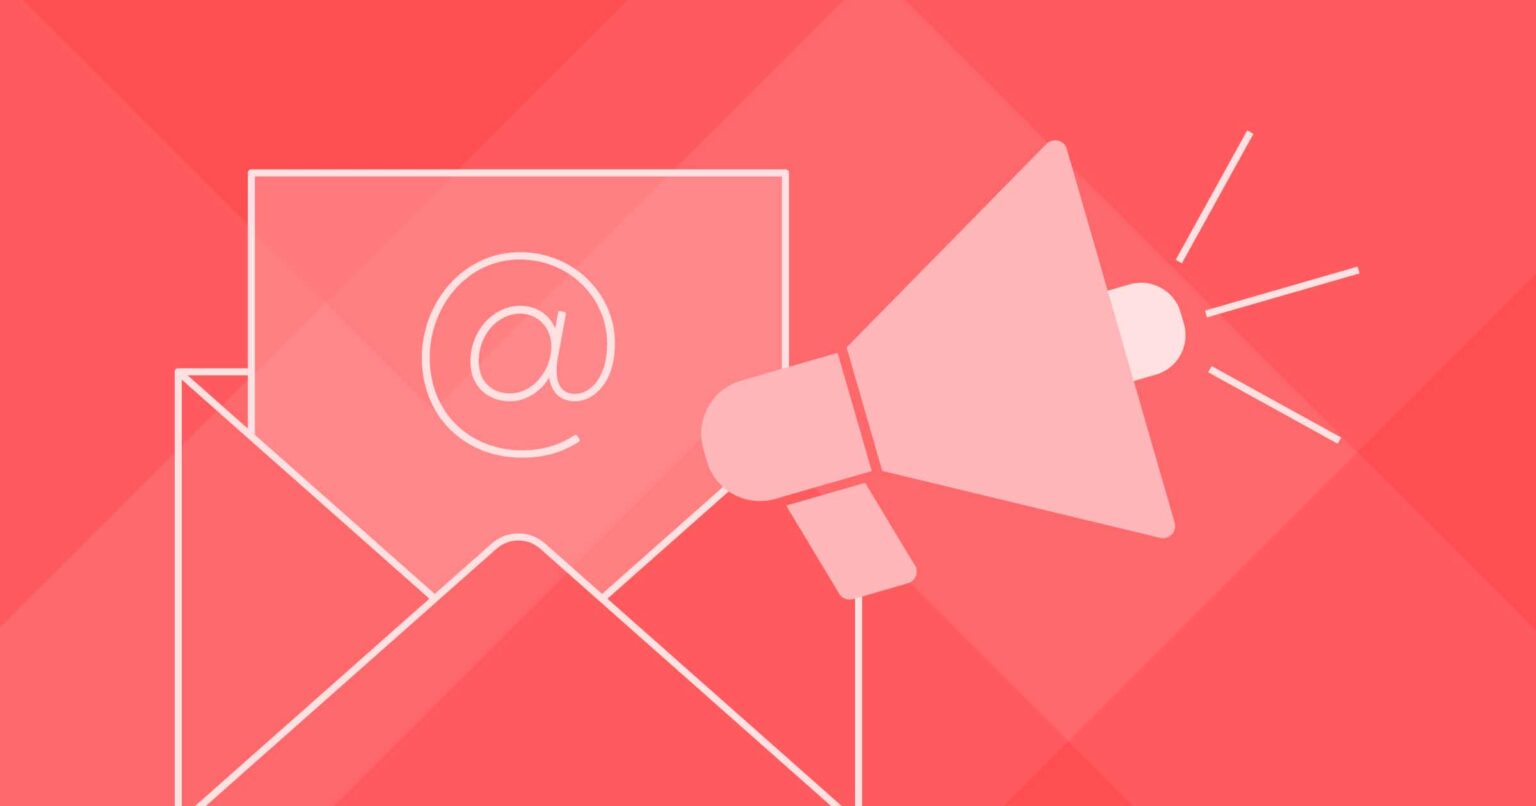 If you're looking to improve your B2B sales, you need to follow our guide with tips to improve your email marketing techniques.